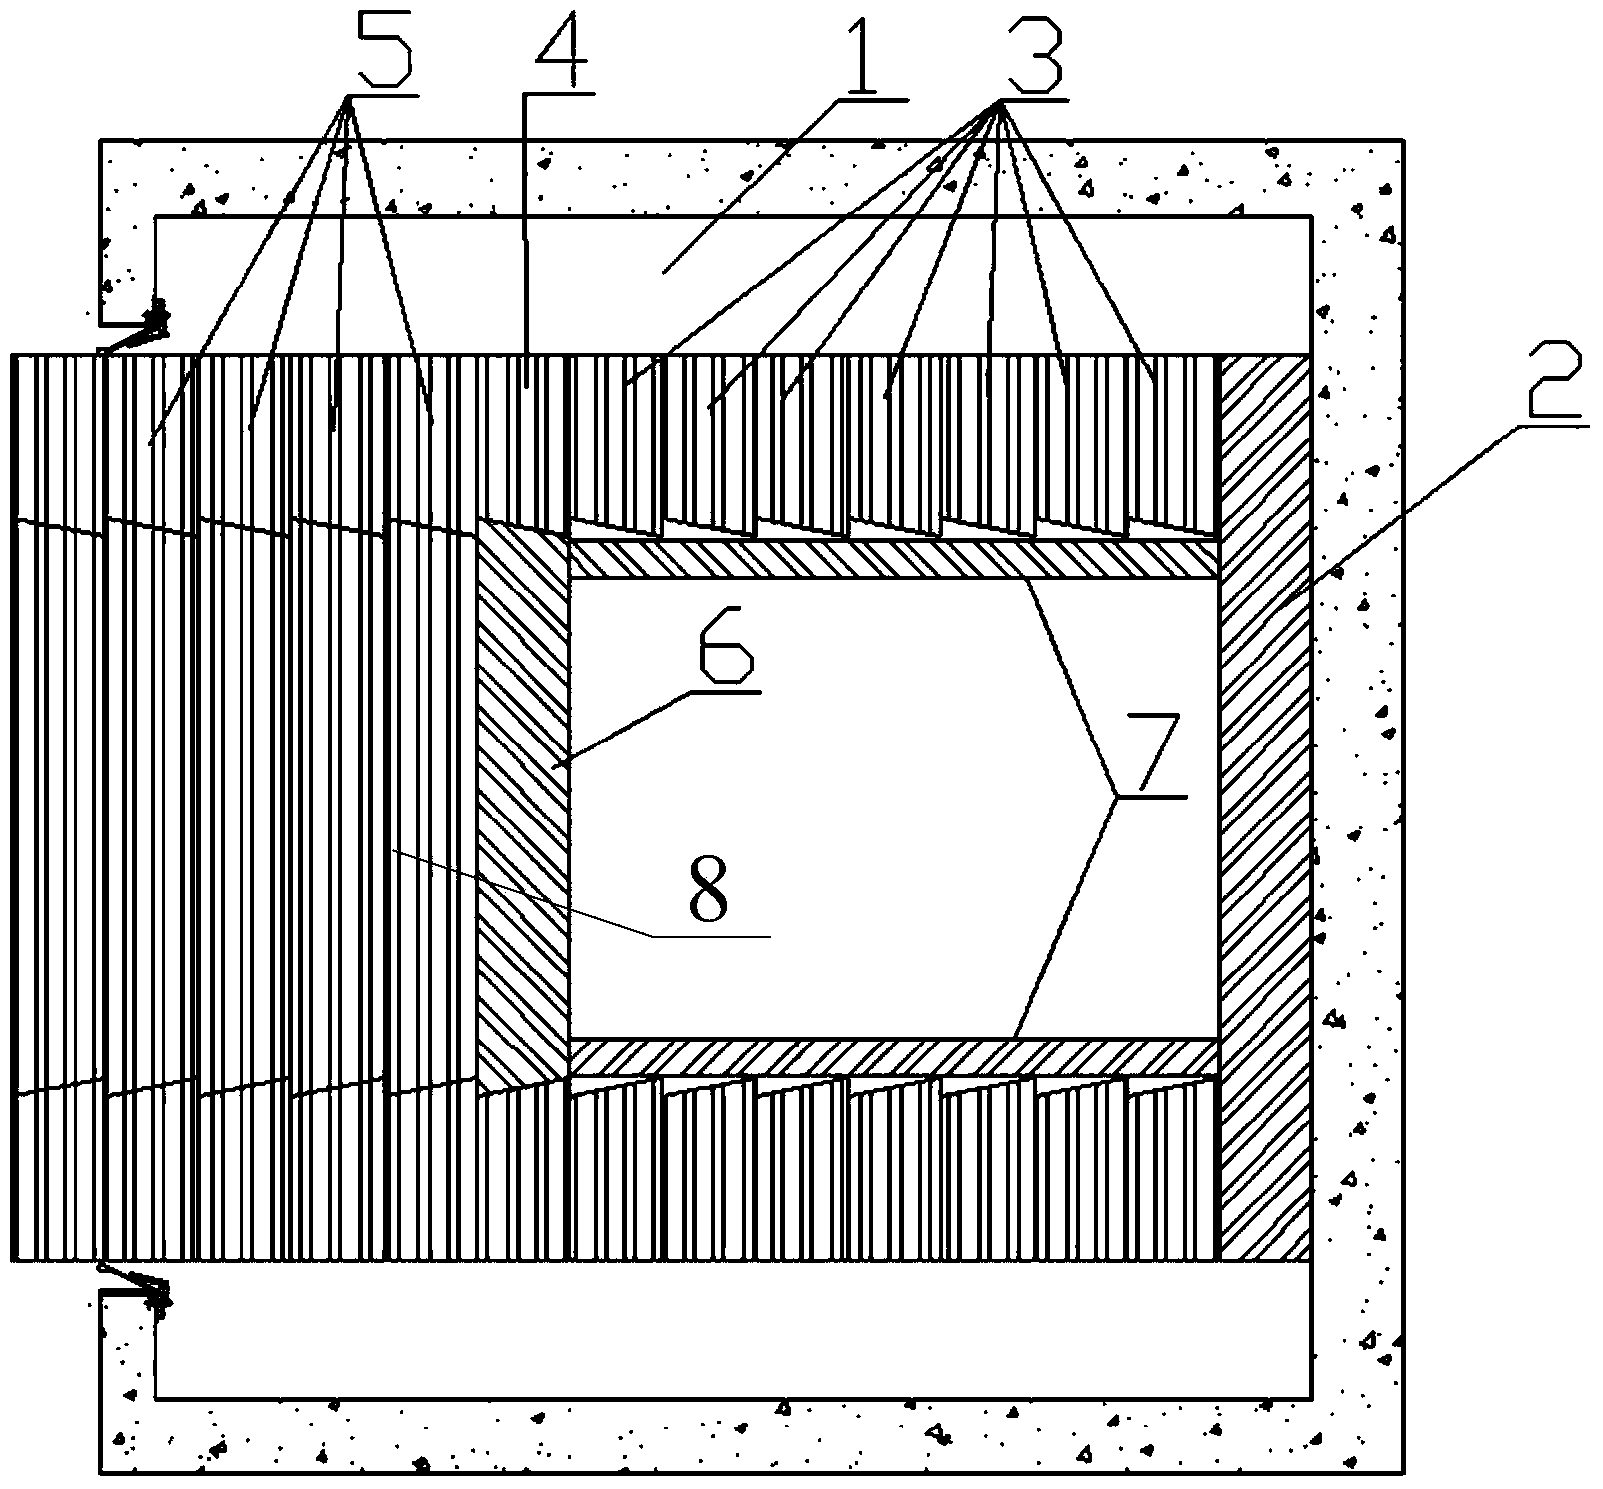 Counter-force system for rectangular shield tunneling